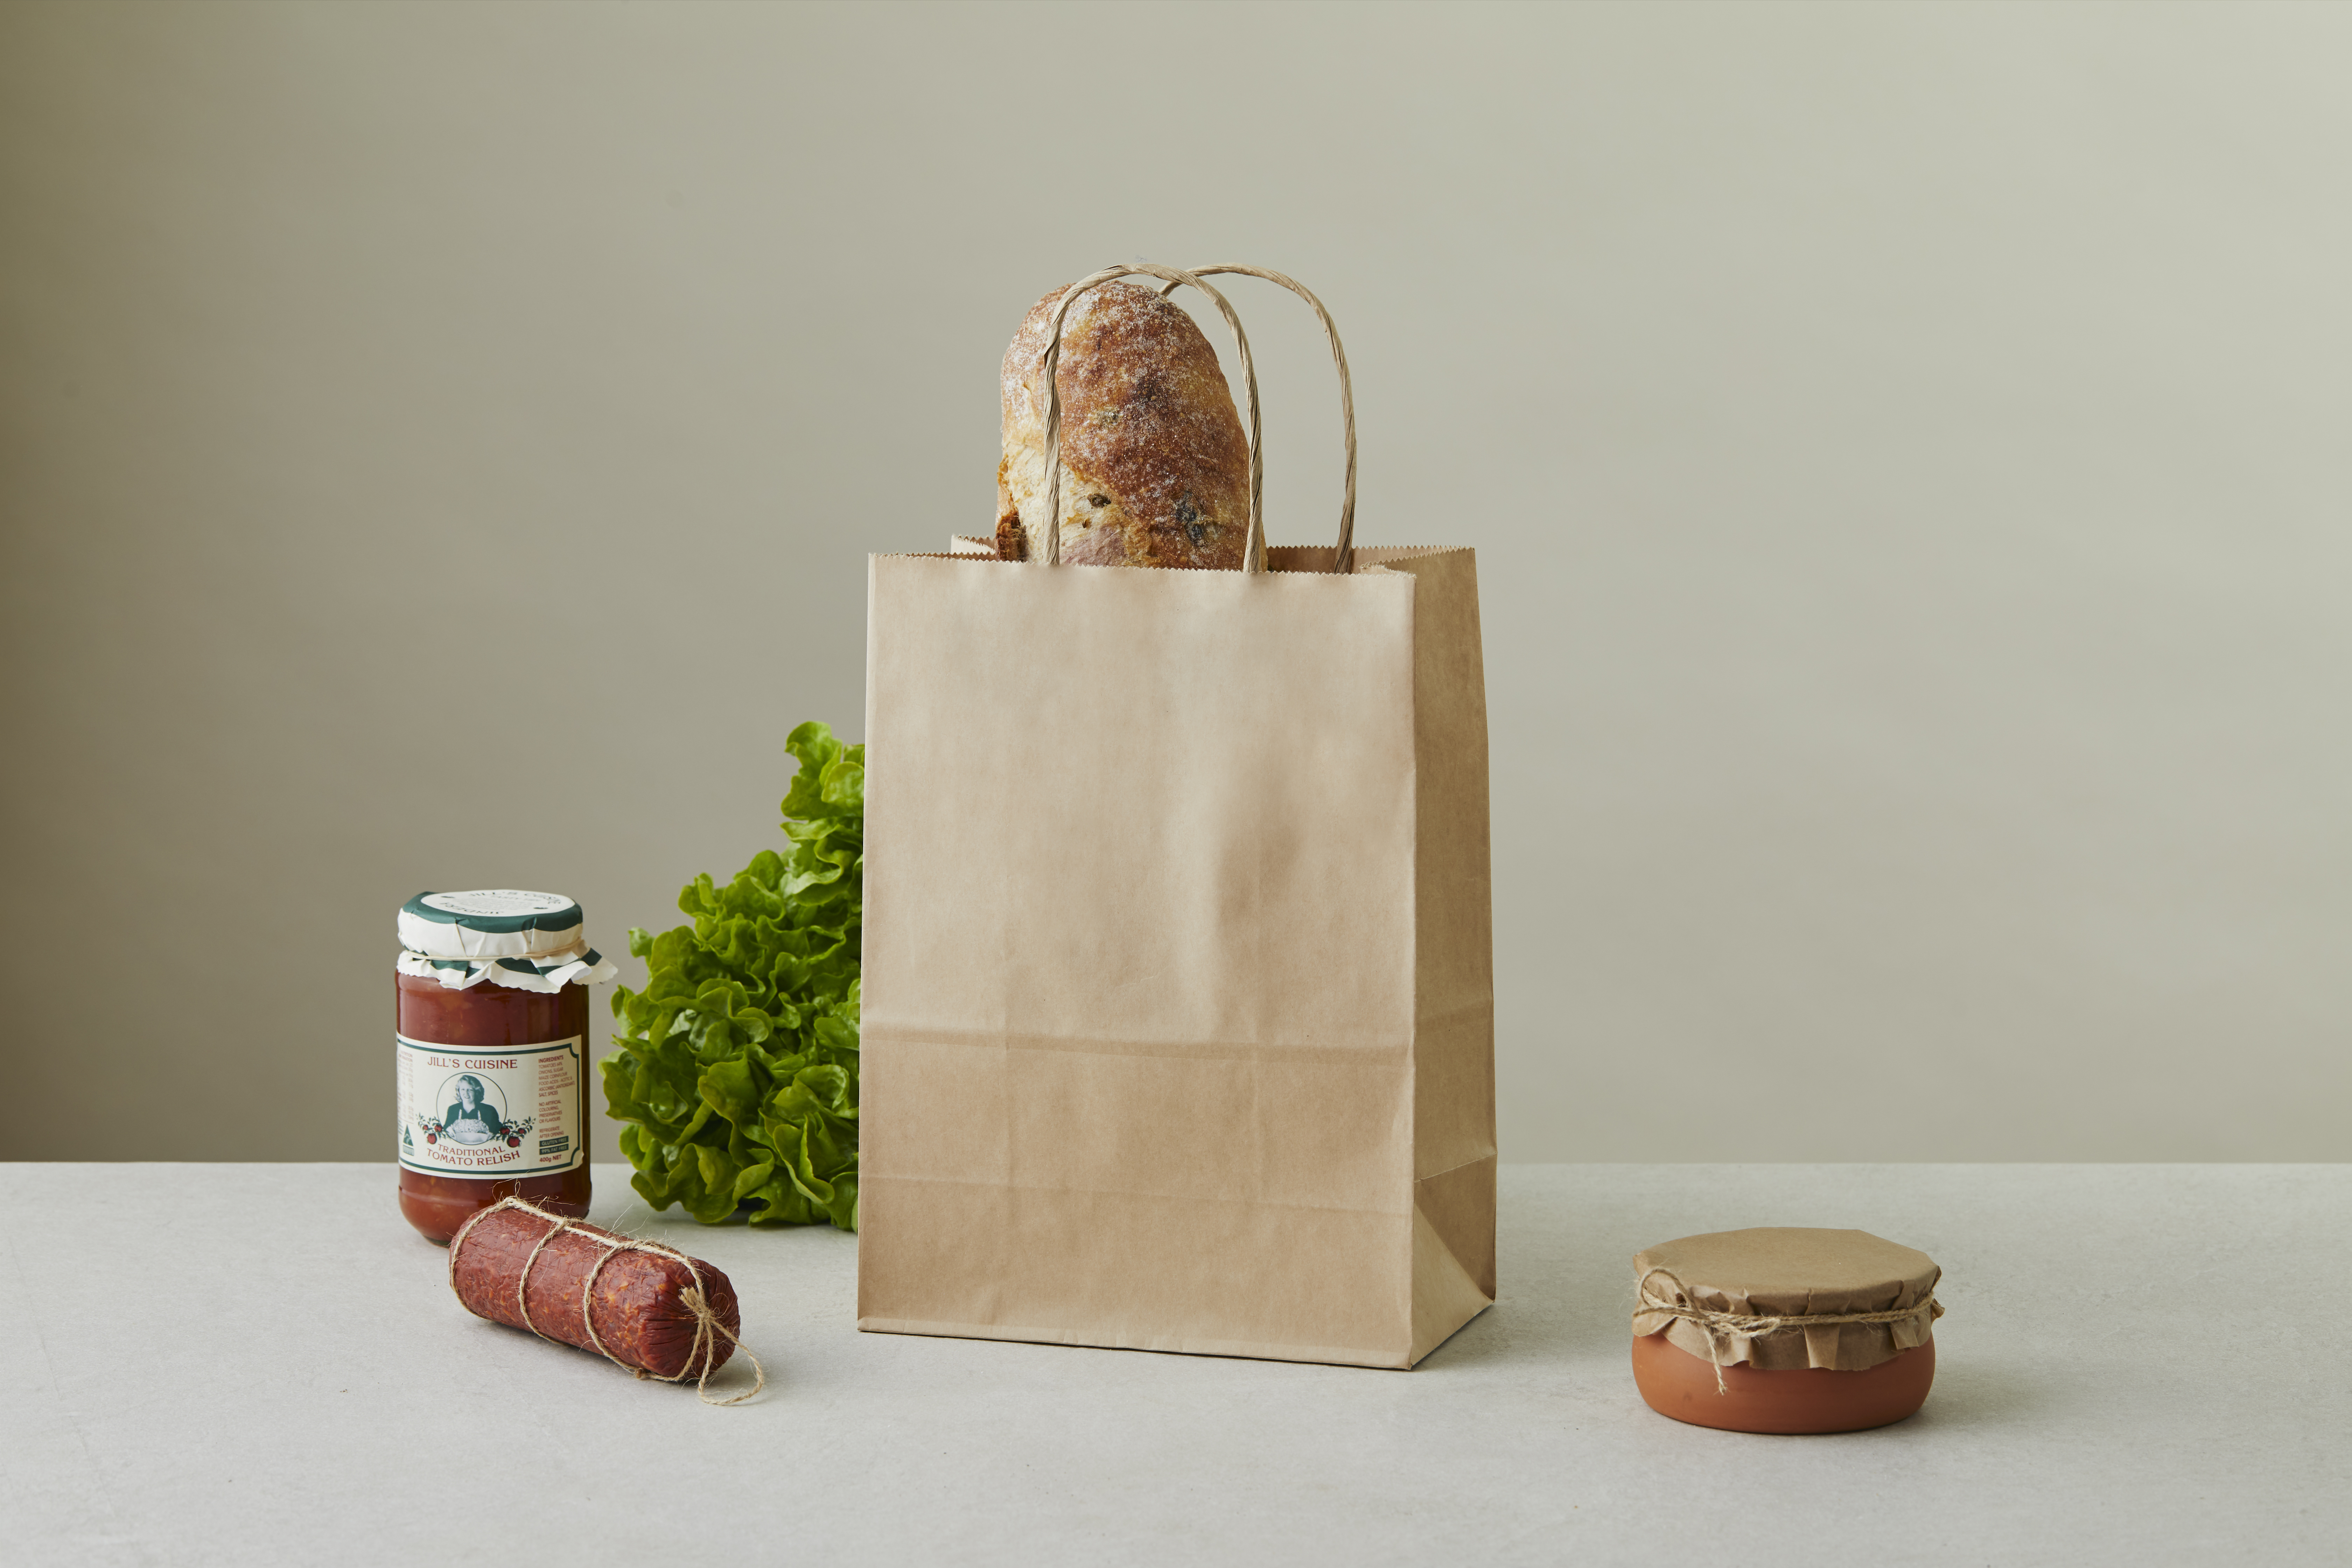 Image of a recyclable paper bag filled with bread.